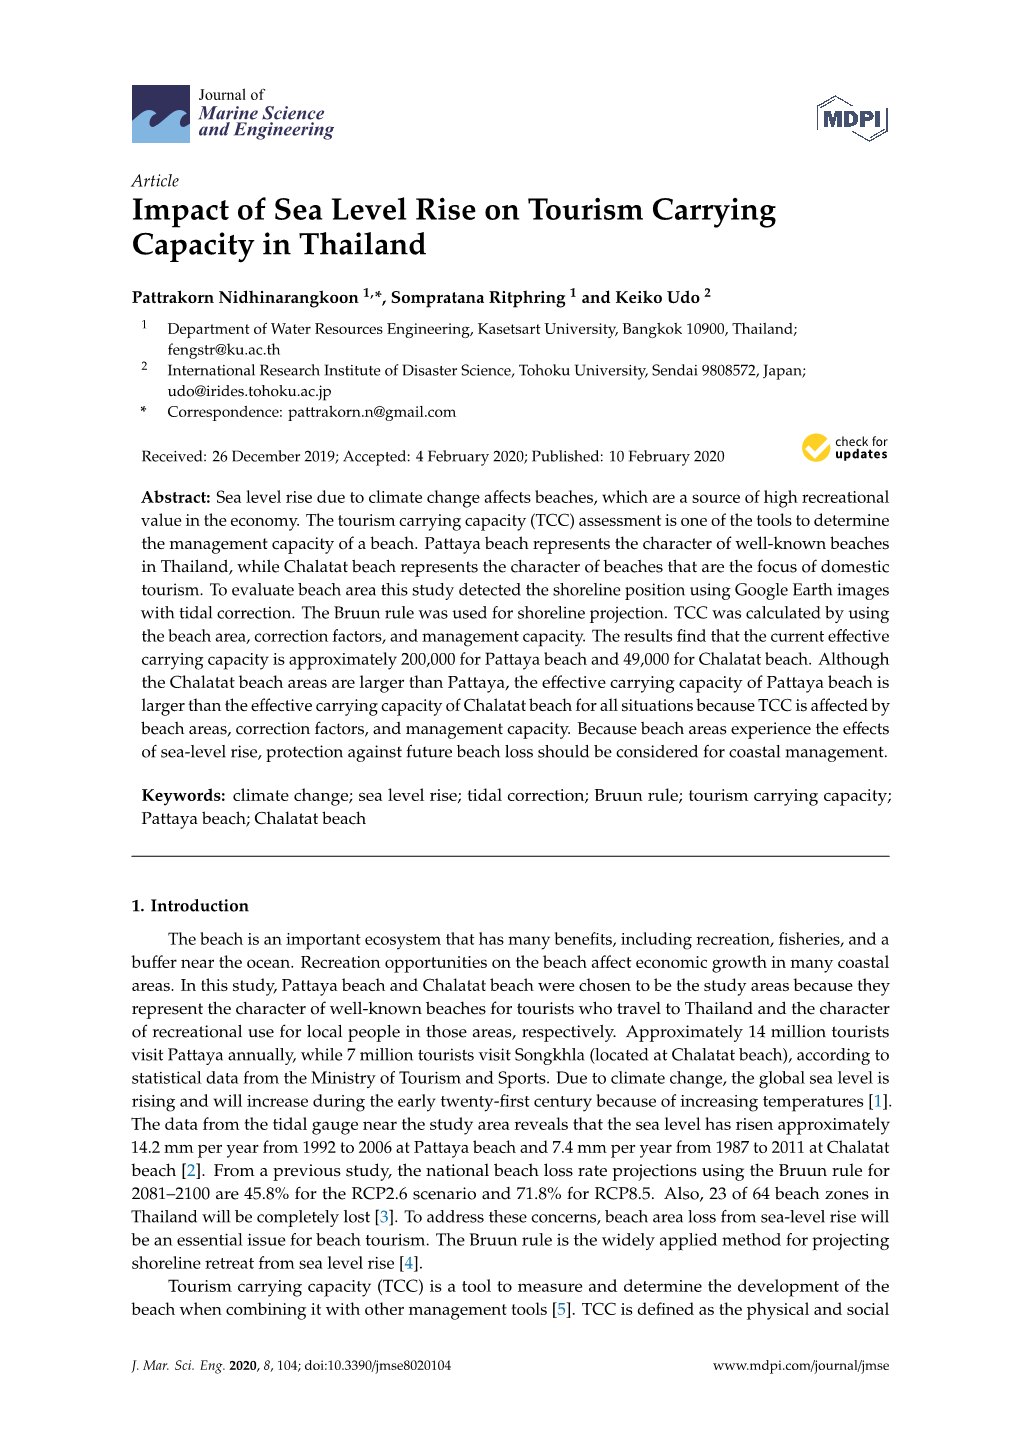 Impact of Sea Level Rise on Tourism Carrying Capacity in Thailand